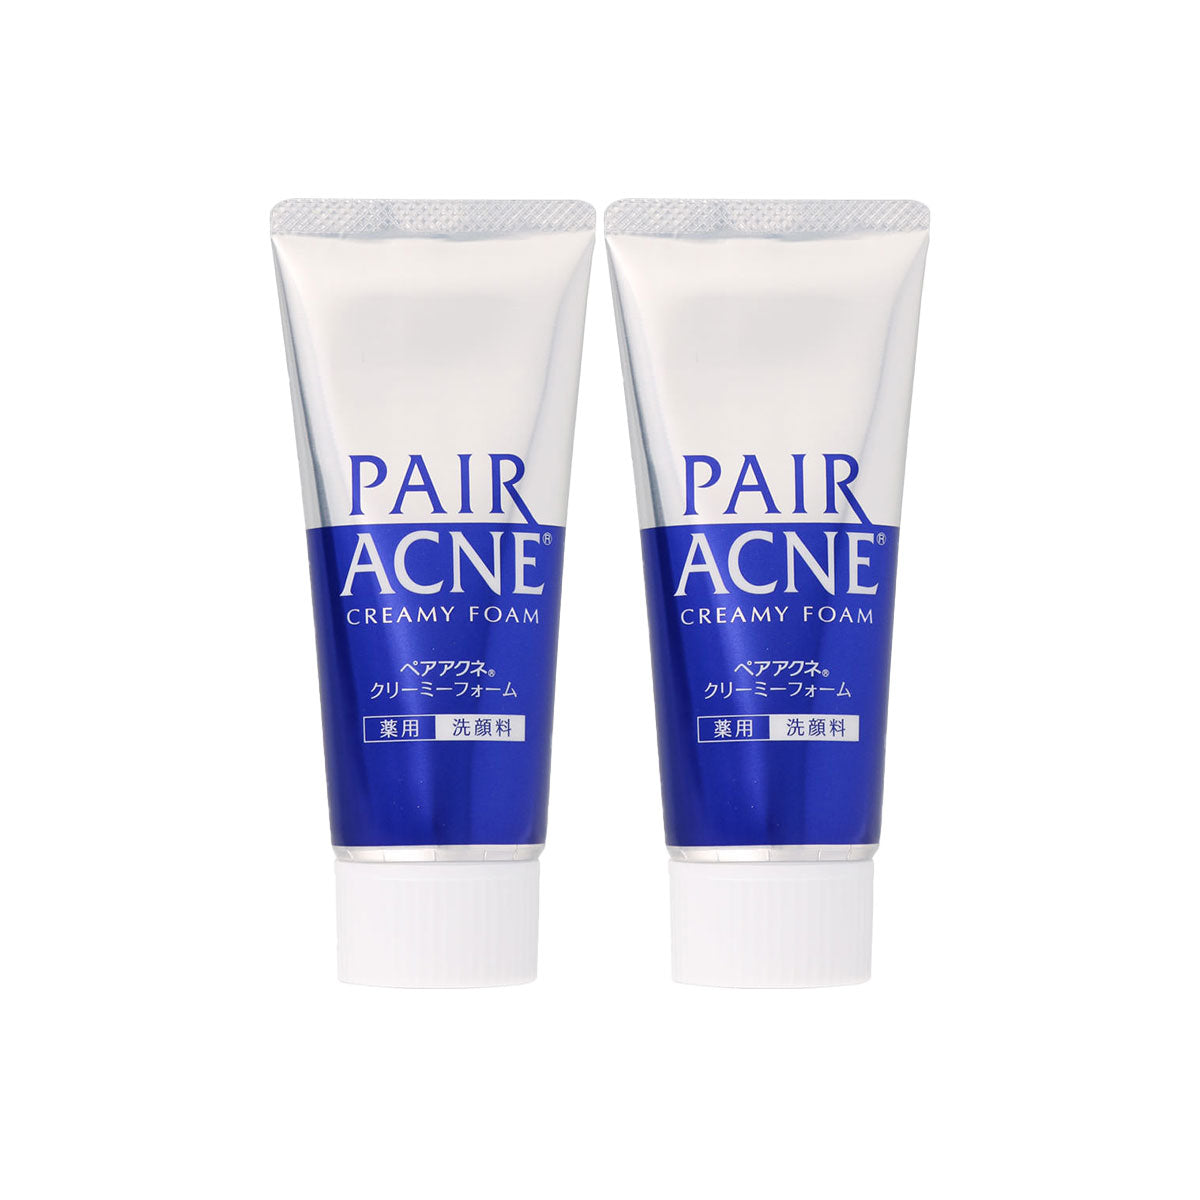 Lion Pair Acne Creamy Foam Facial Wash 80g pack of 2